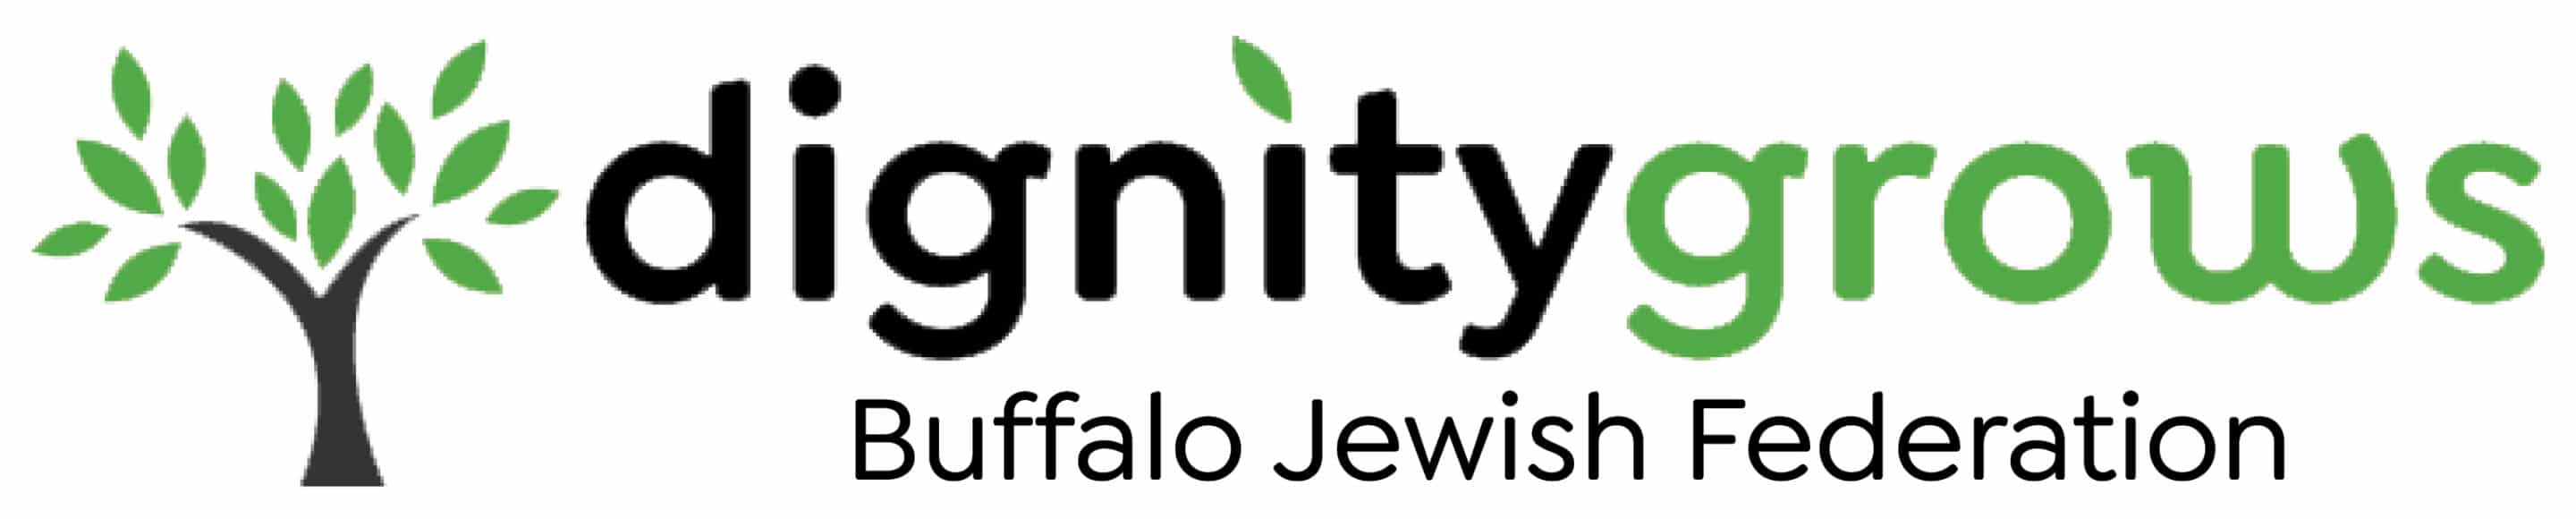 Dignity Grows Donation Form - Dignity Grows Buffalo Logo 2 June 2021 c scaled